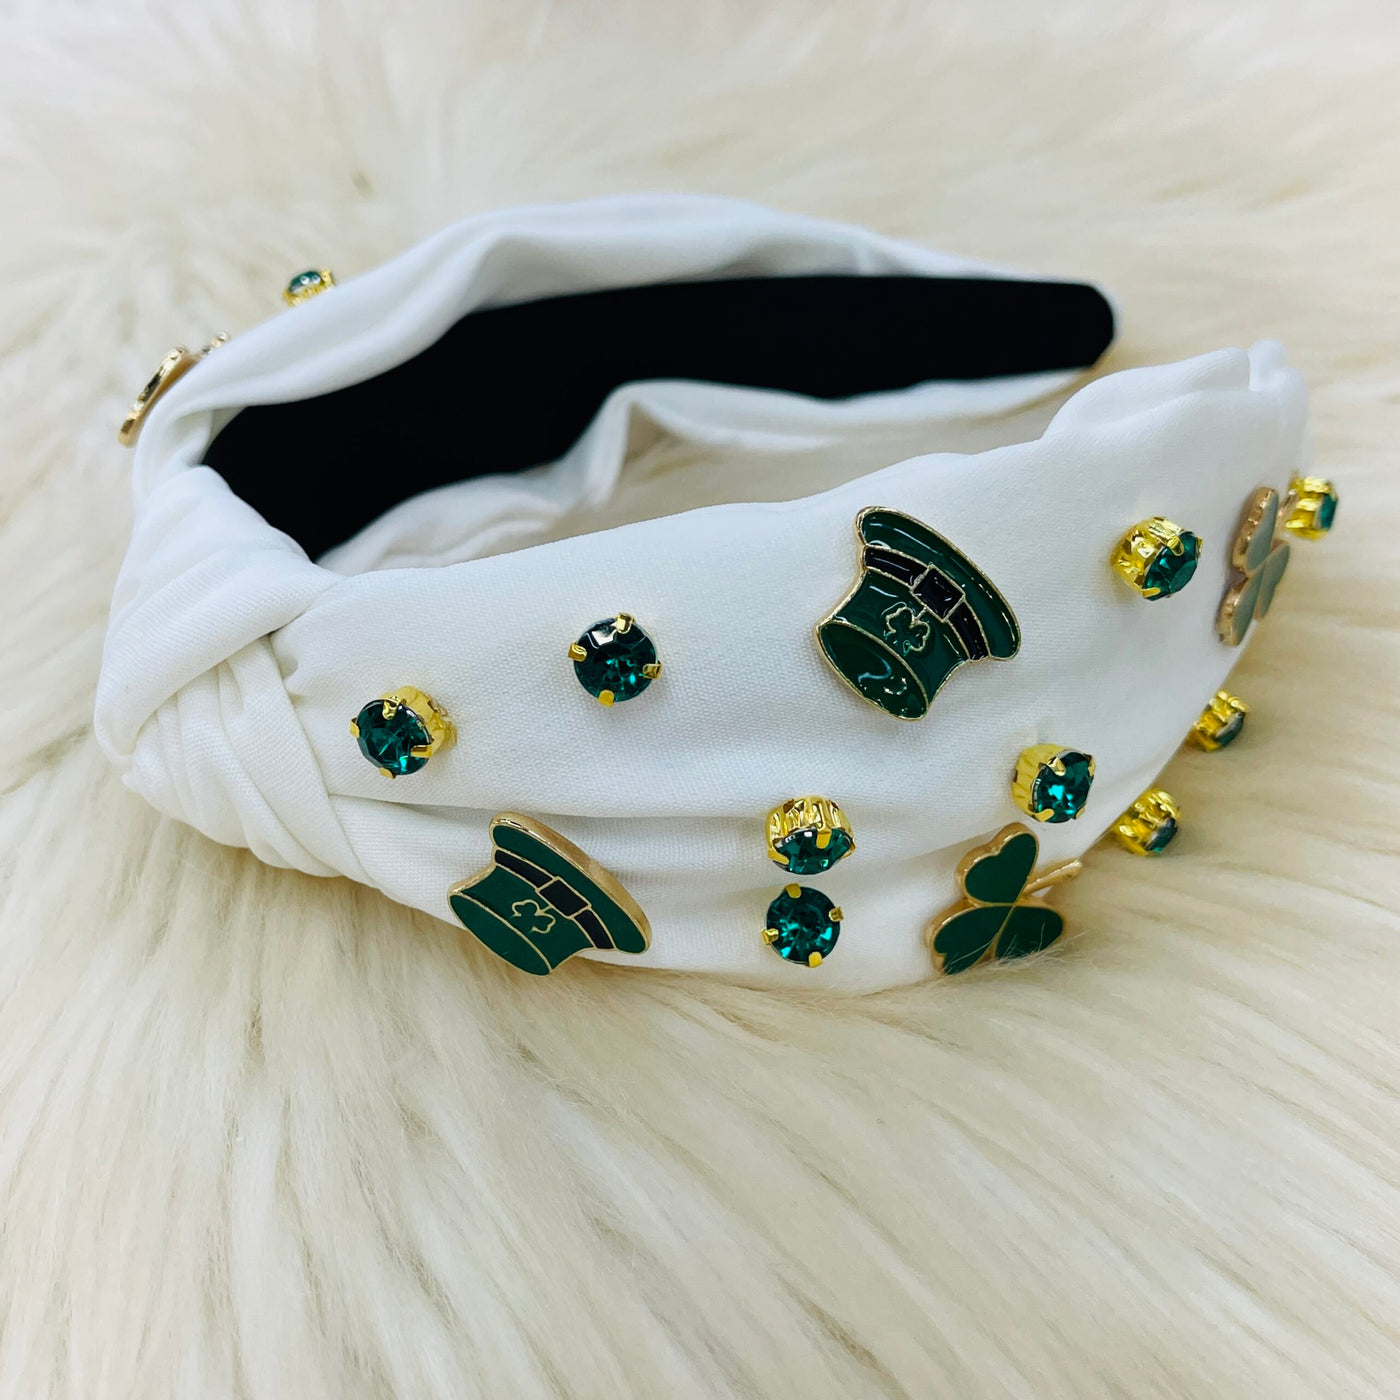 White St. Patty's Headband with Clovers and Hats